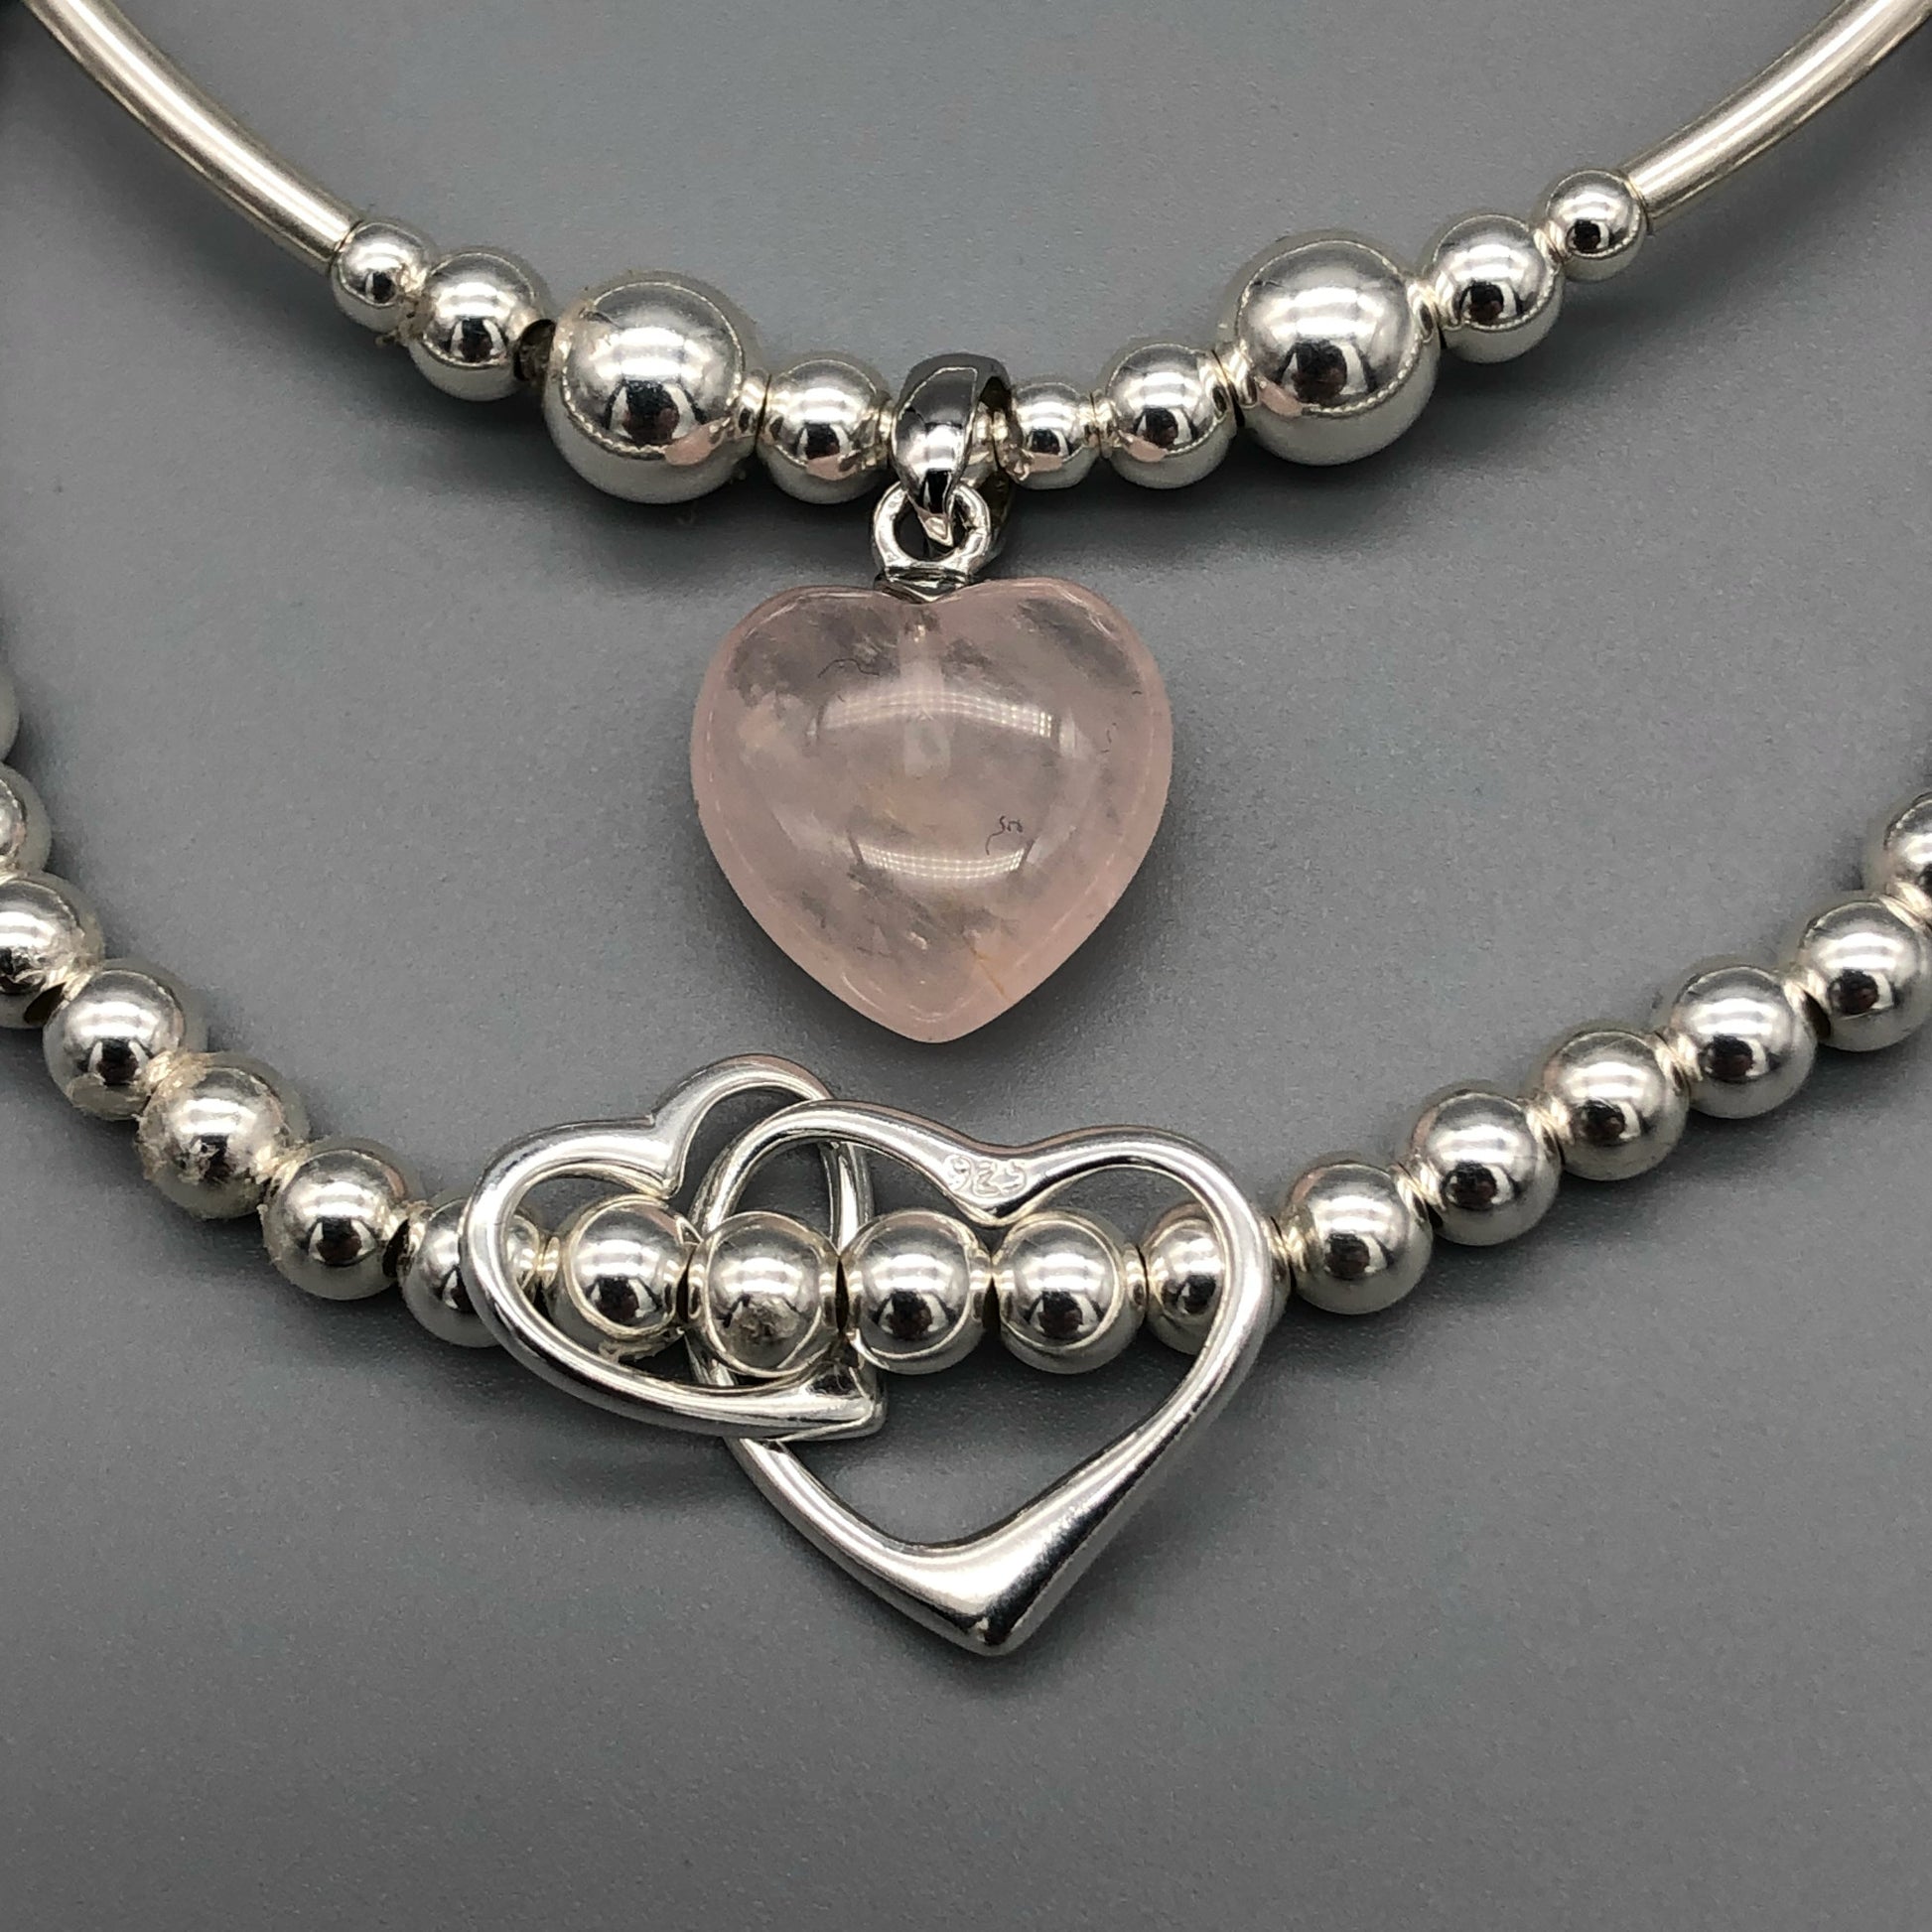 Closeup of Rose quartz heart & sterling silver twin heart charms women's stacking bracelet set by My Silver Wish